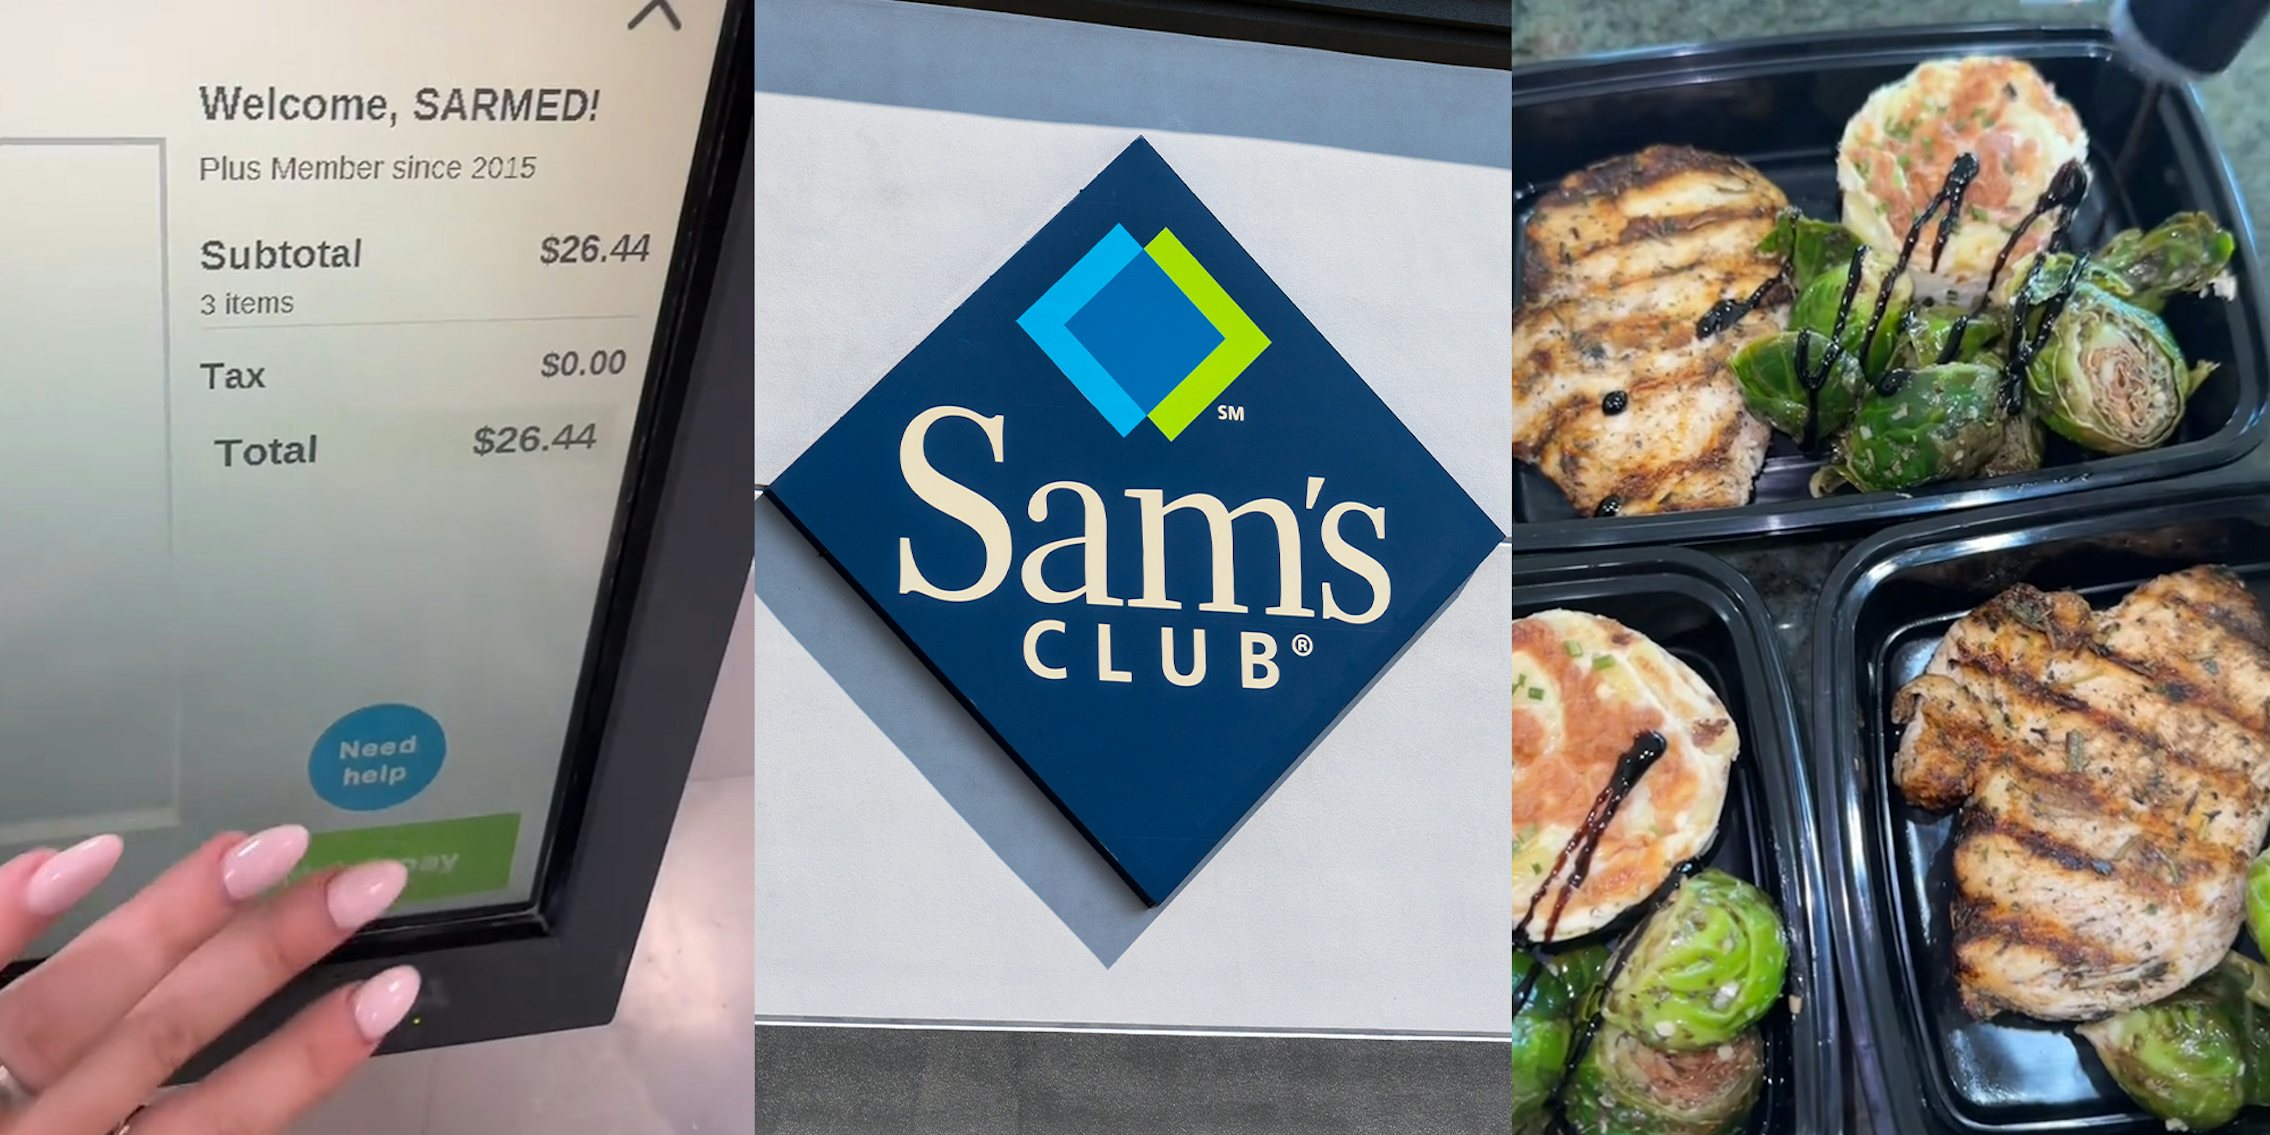 Sam's Club - Add some color to food prep with this AMAZING